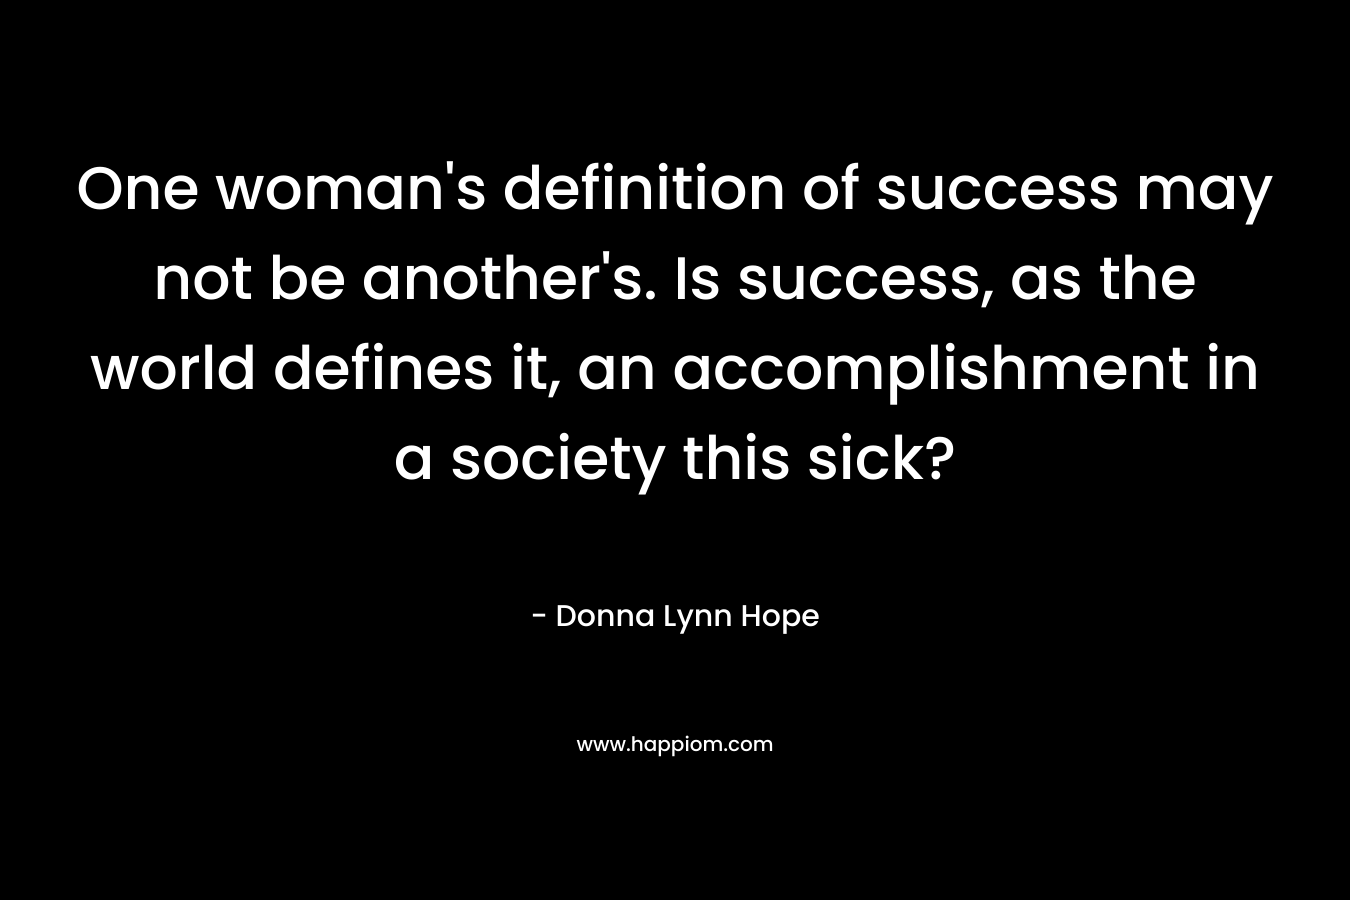 One woman's definition of success may not be another's. Is success, as the world defines it, an accomplishment in a society this sick?